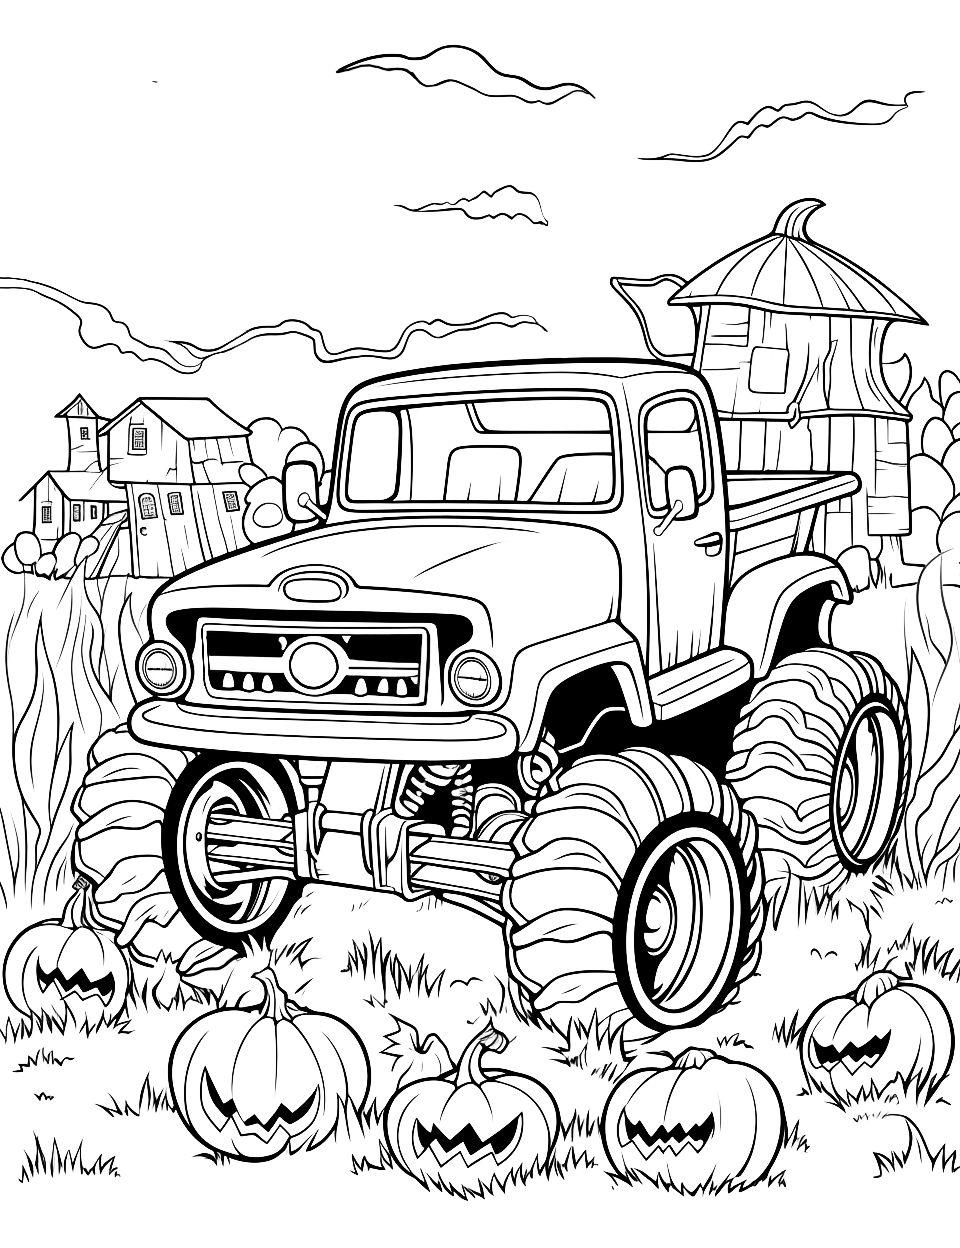 Halloween Haunt Monster Truck Coloring Page - A monster truck parked by a pumpkin patch with a haunted house backdrop.